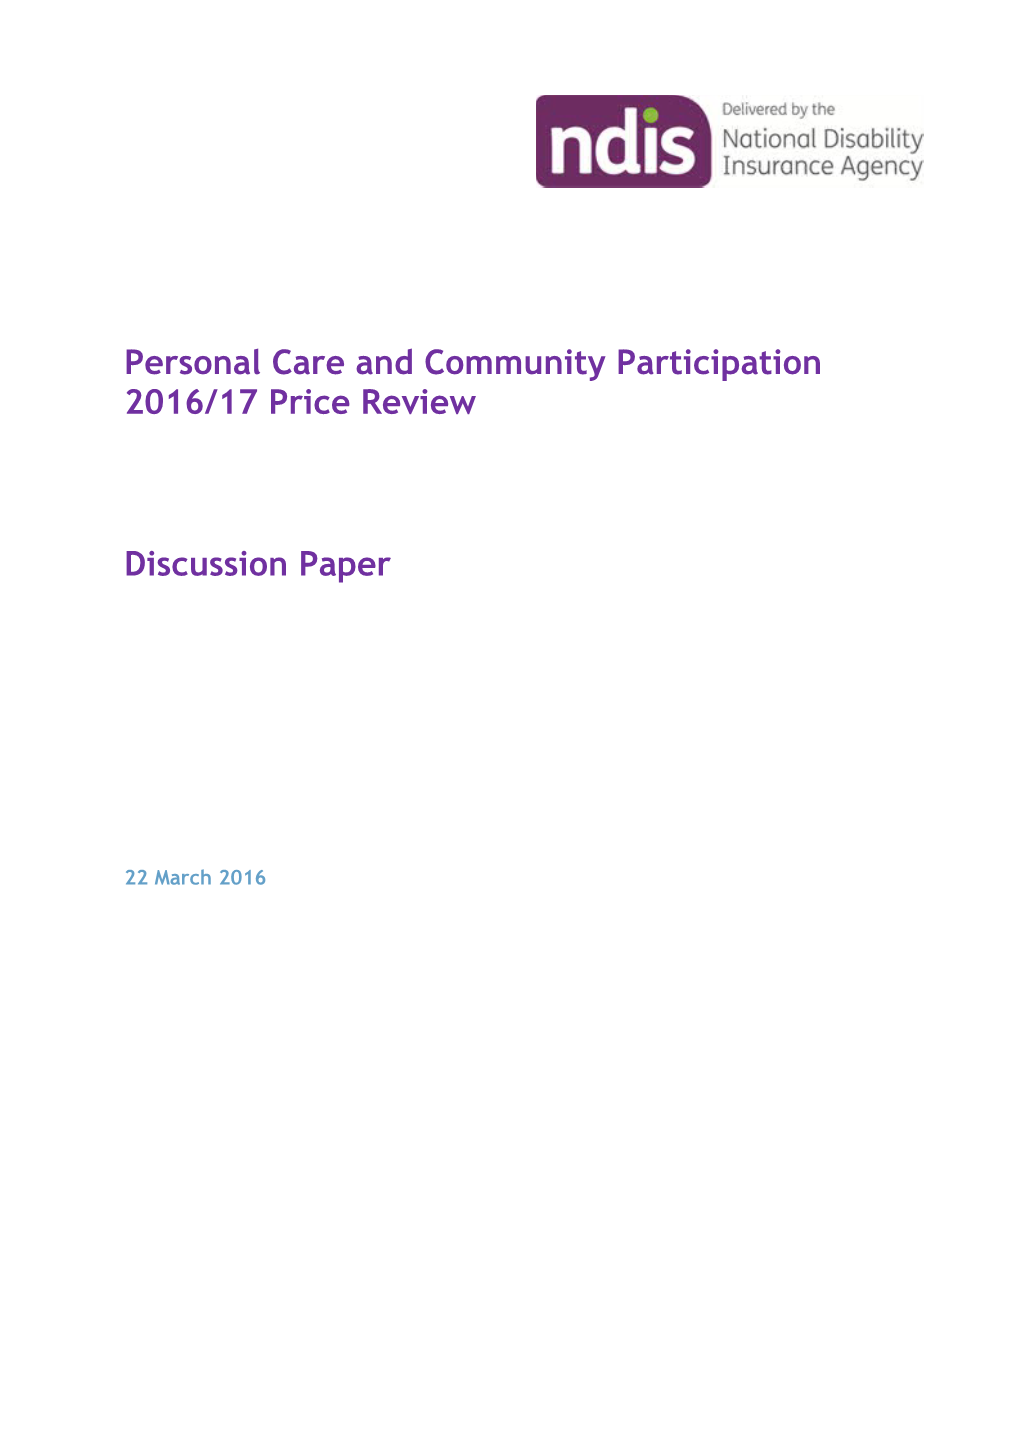 Personal Care and Community Participation 2016/17 Price Review